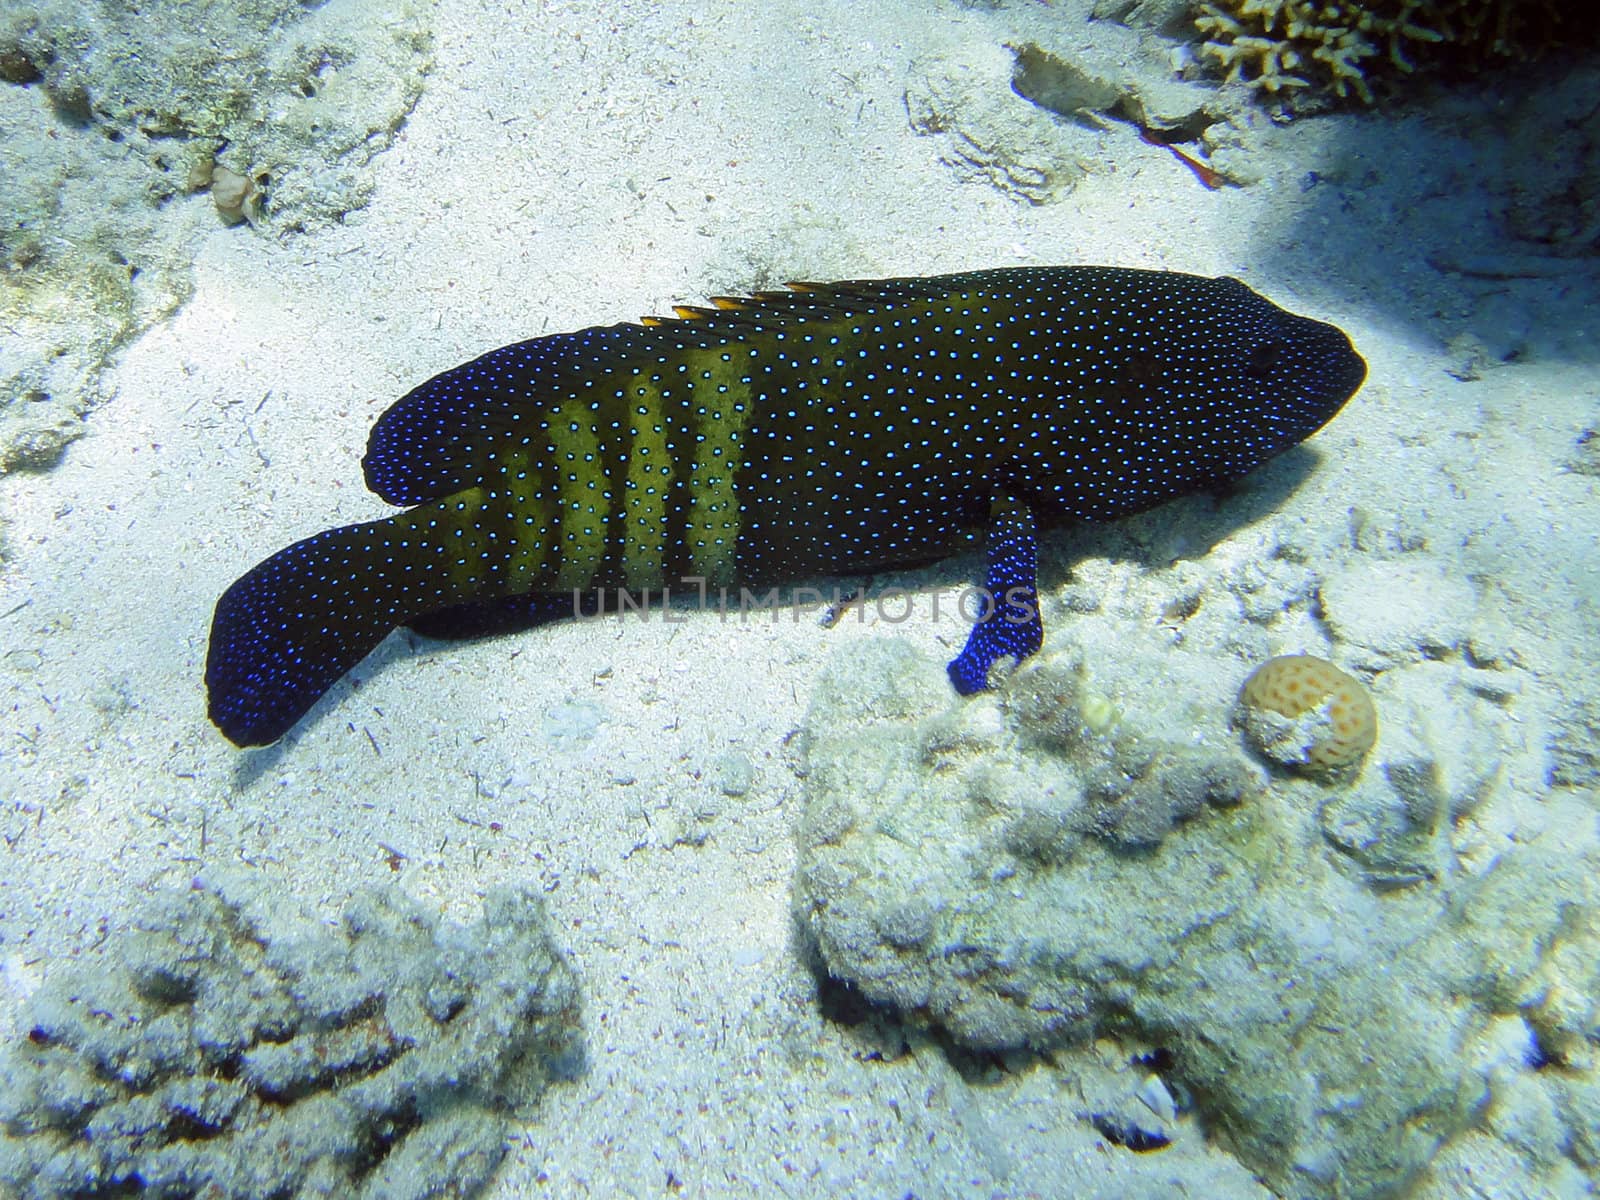 Vacation grouper in Red sea, Sharm El Sheikh, Egypt